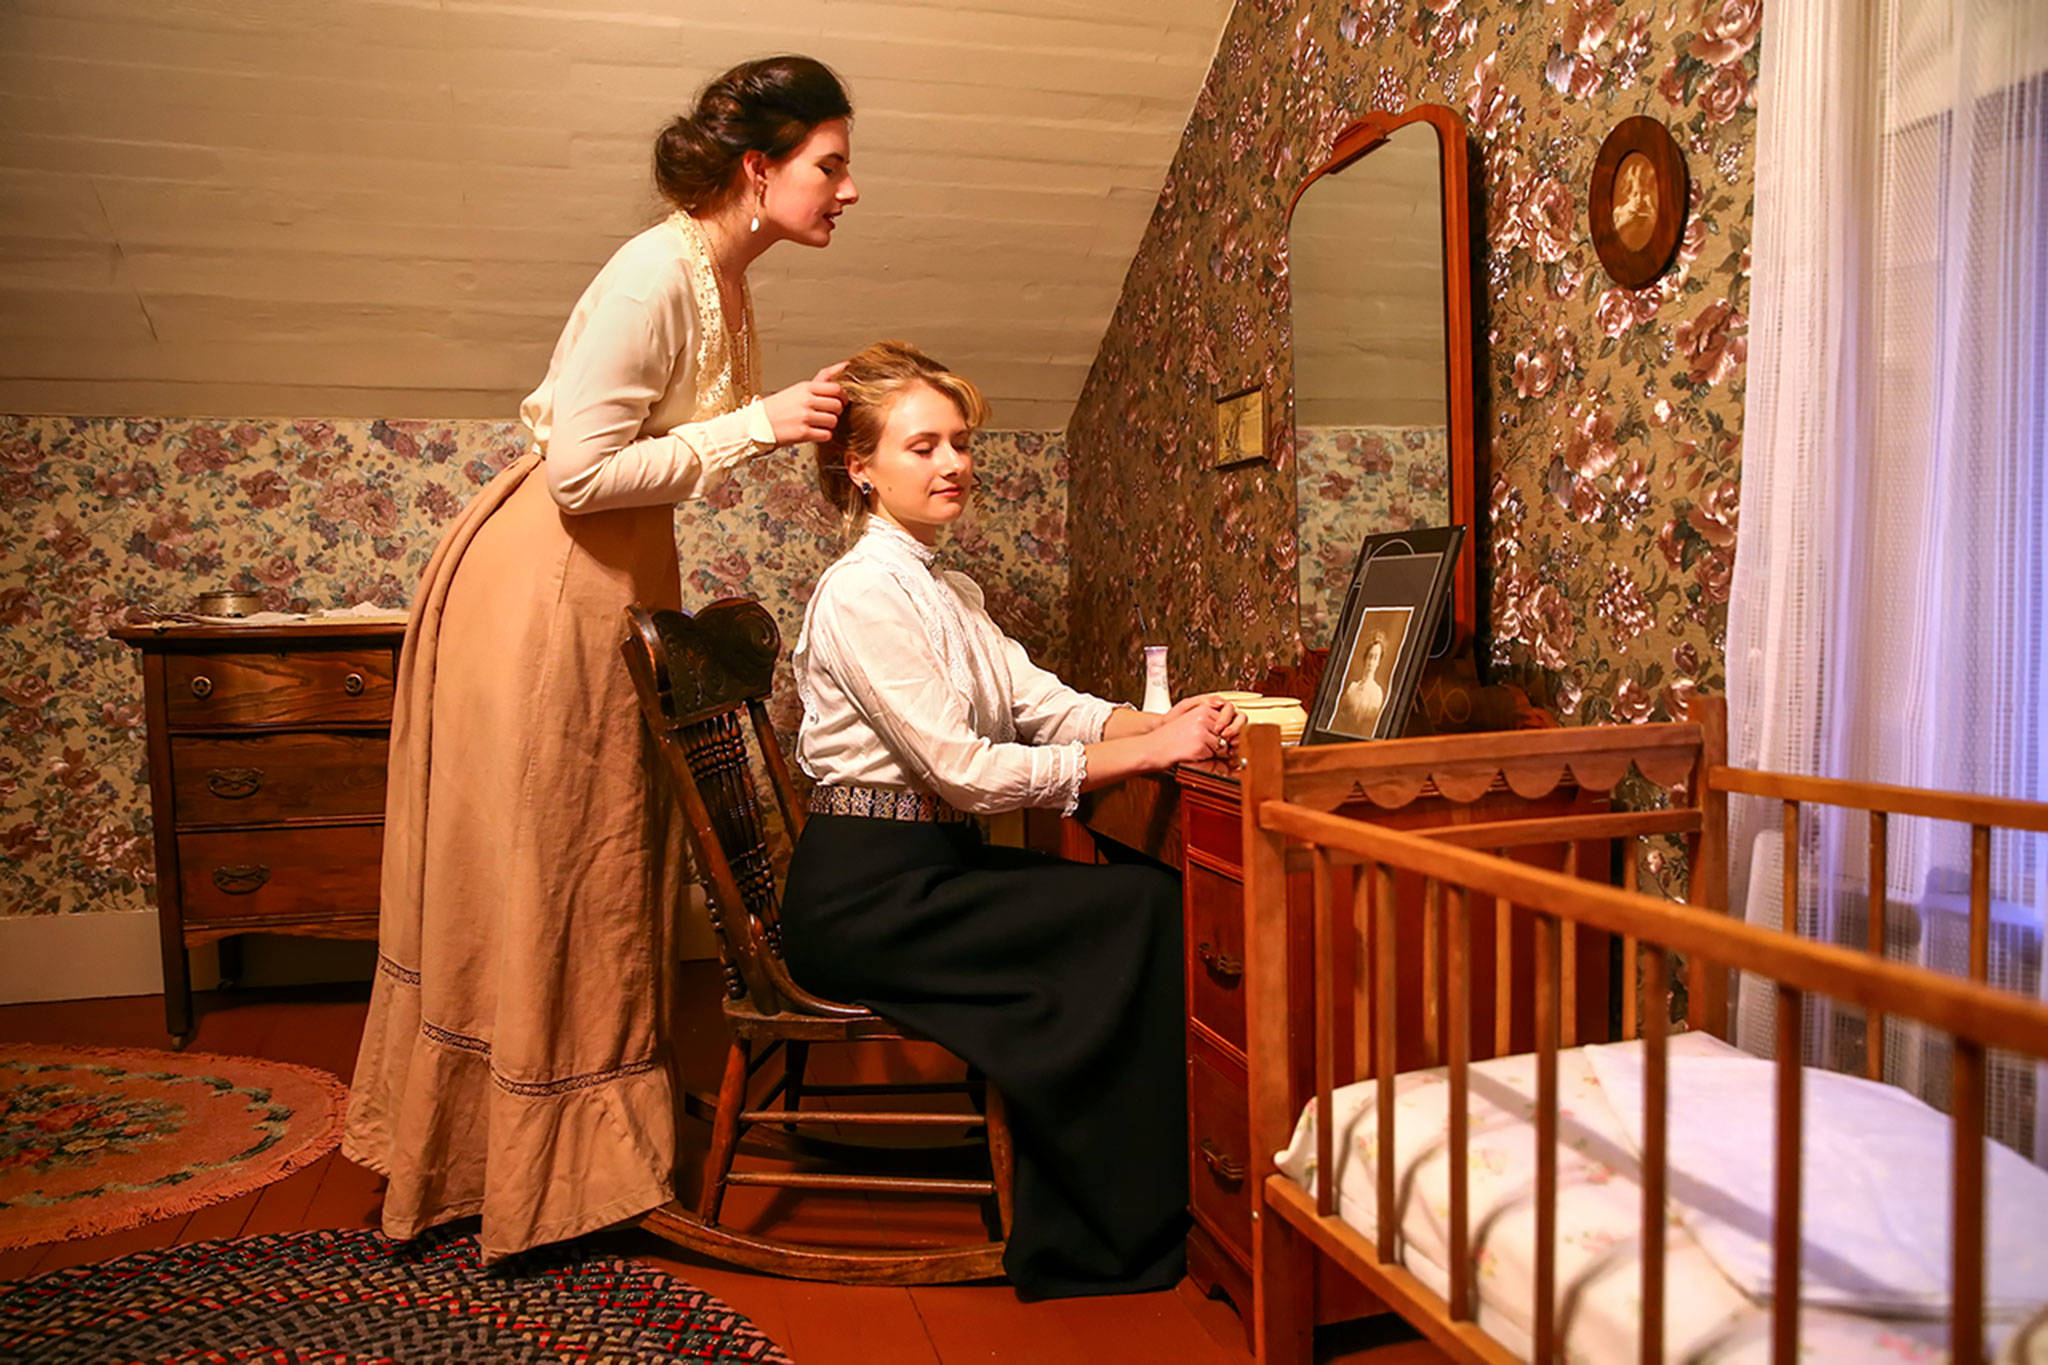 Autumn (left) and Emerald Adams primp in an upstairs bedroom at the Grimm House. (Kevin Clark / The Herald)